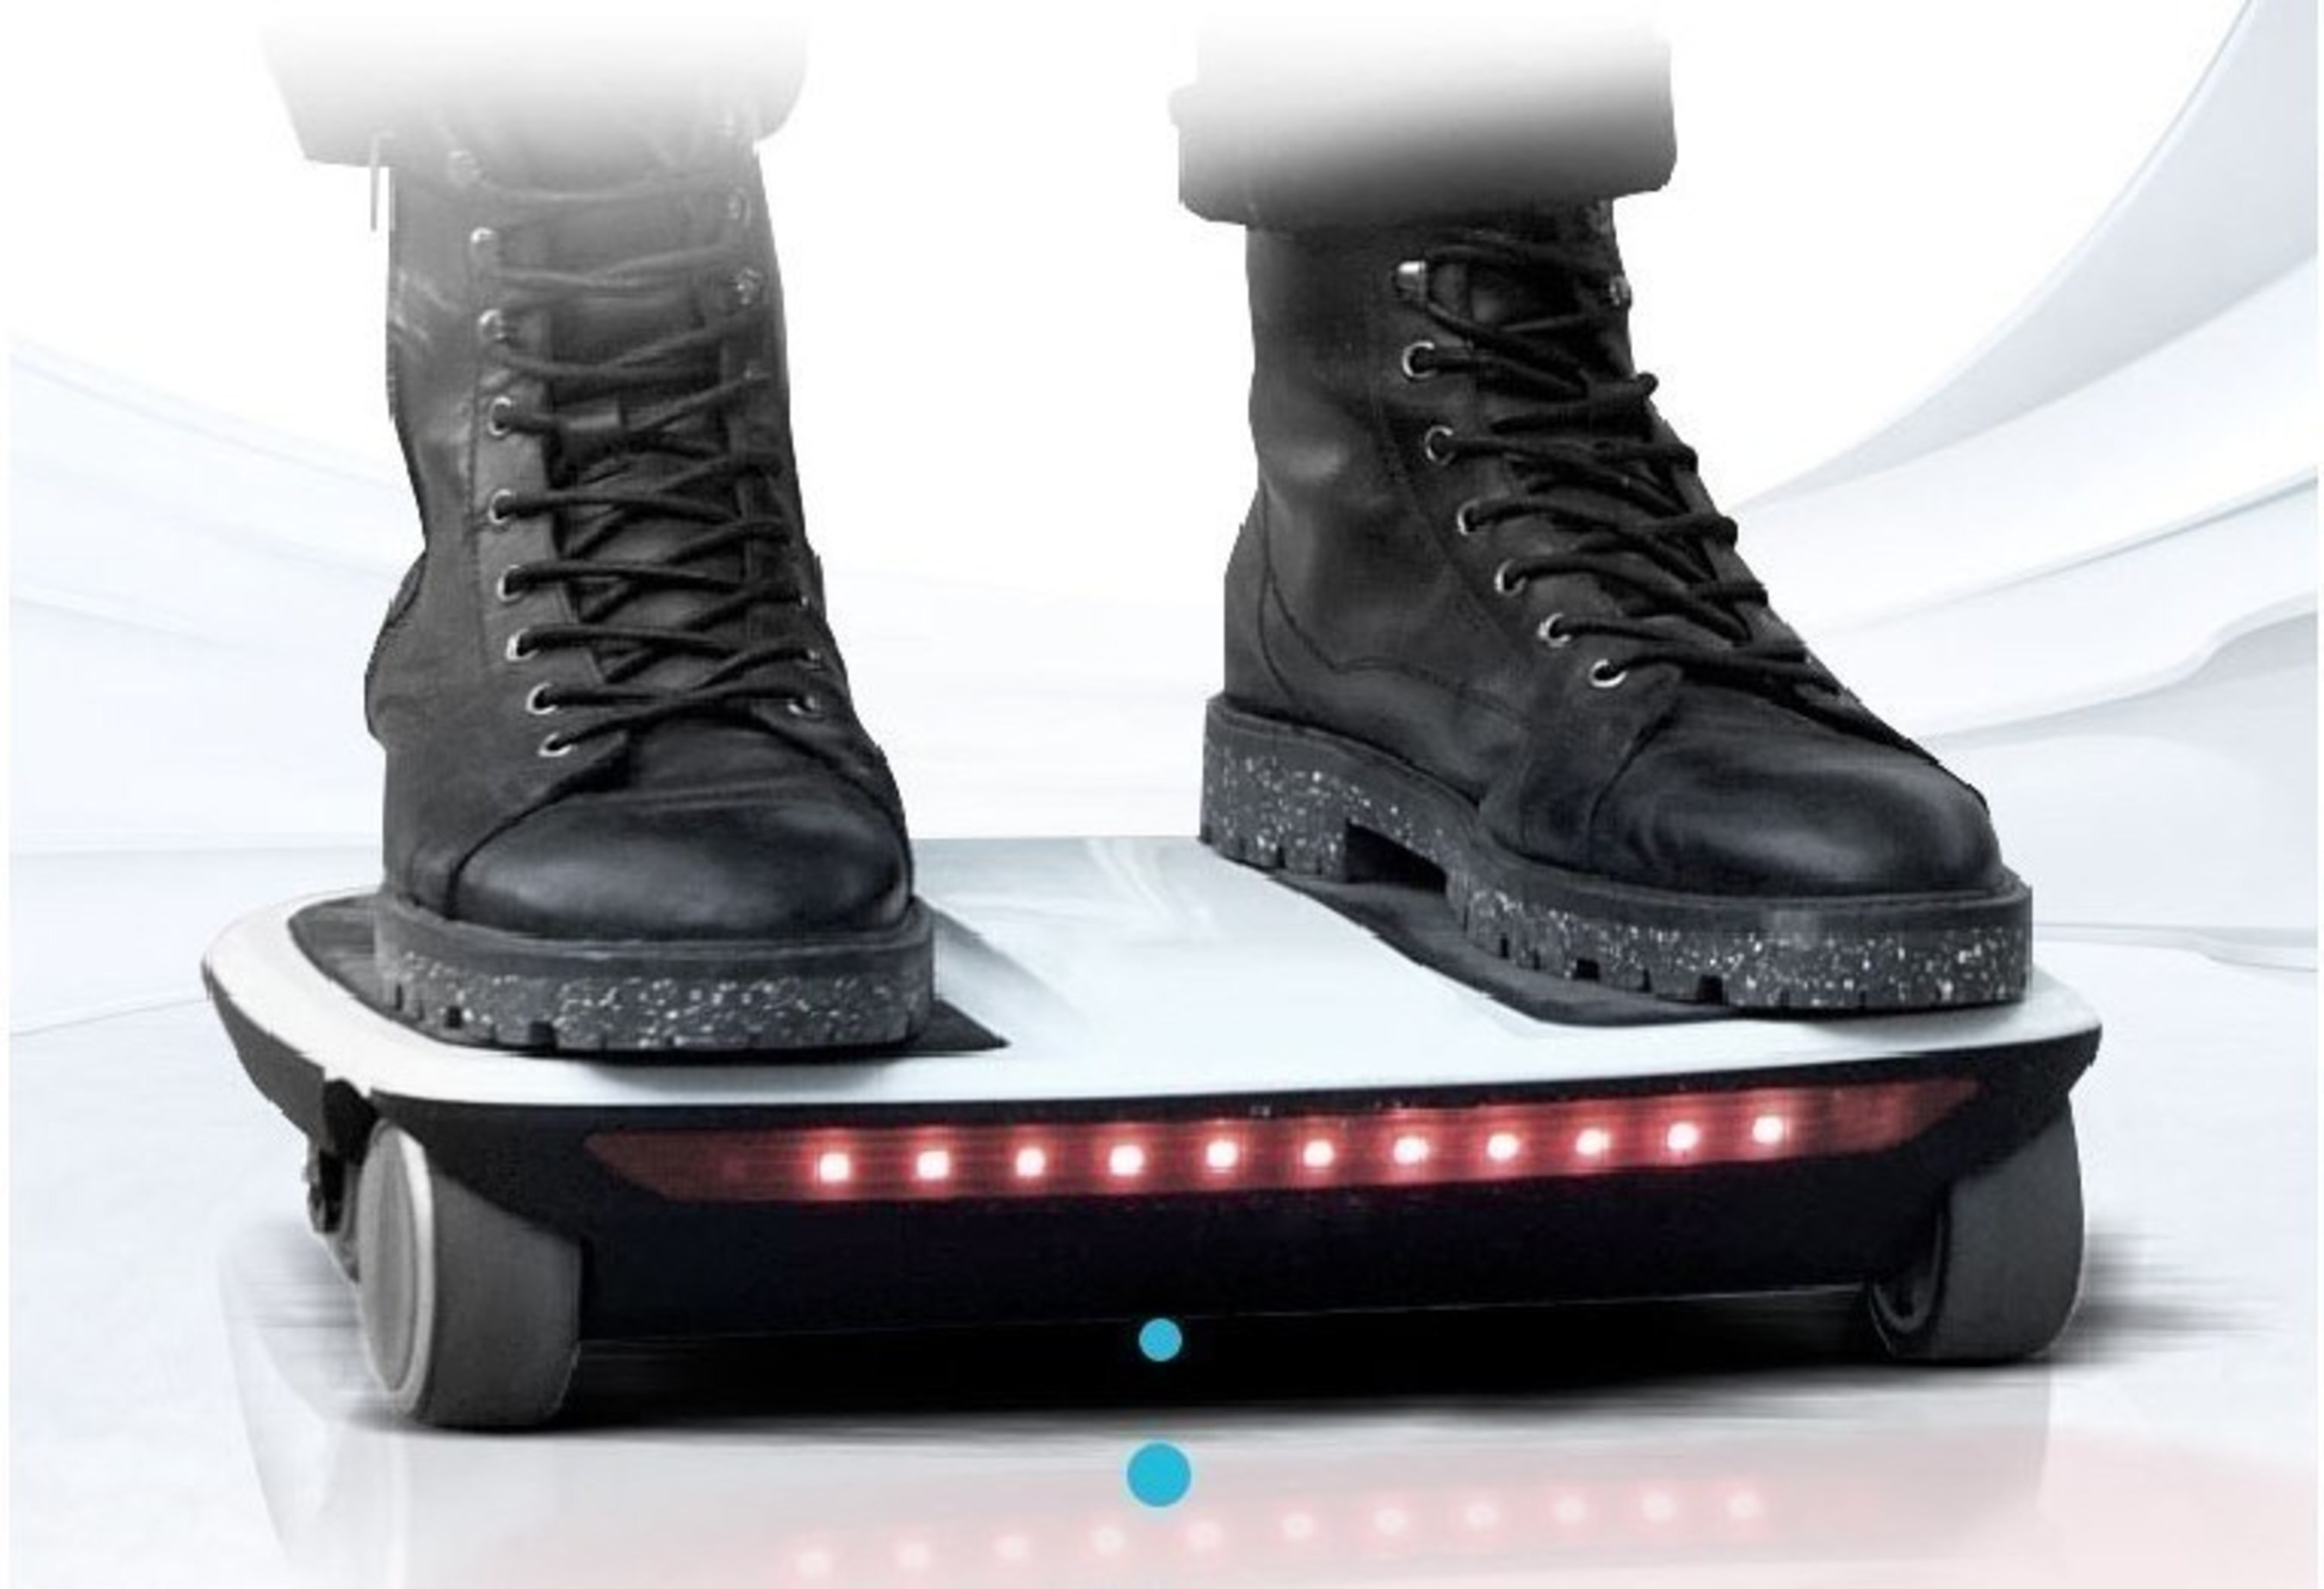 iCarbot -- The Latest Raving Four-Wheeled Electric Hoverboard